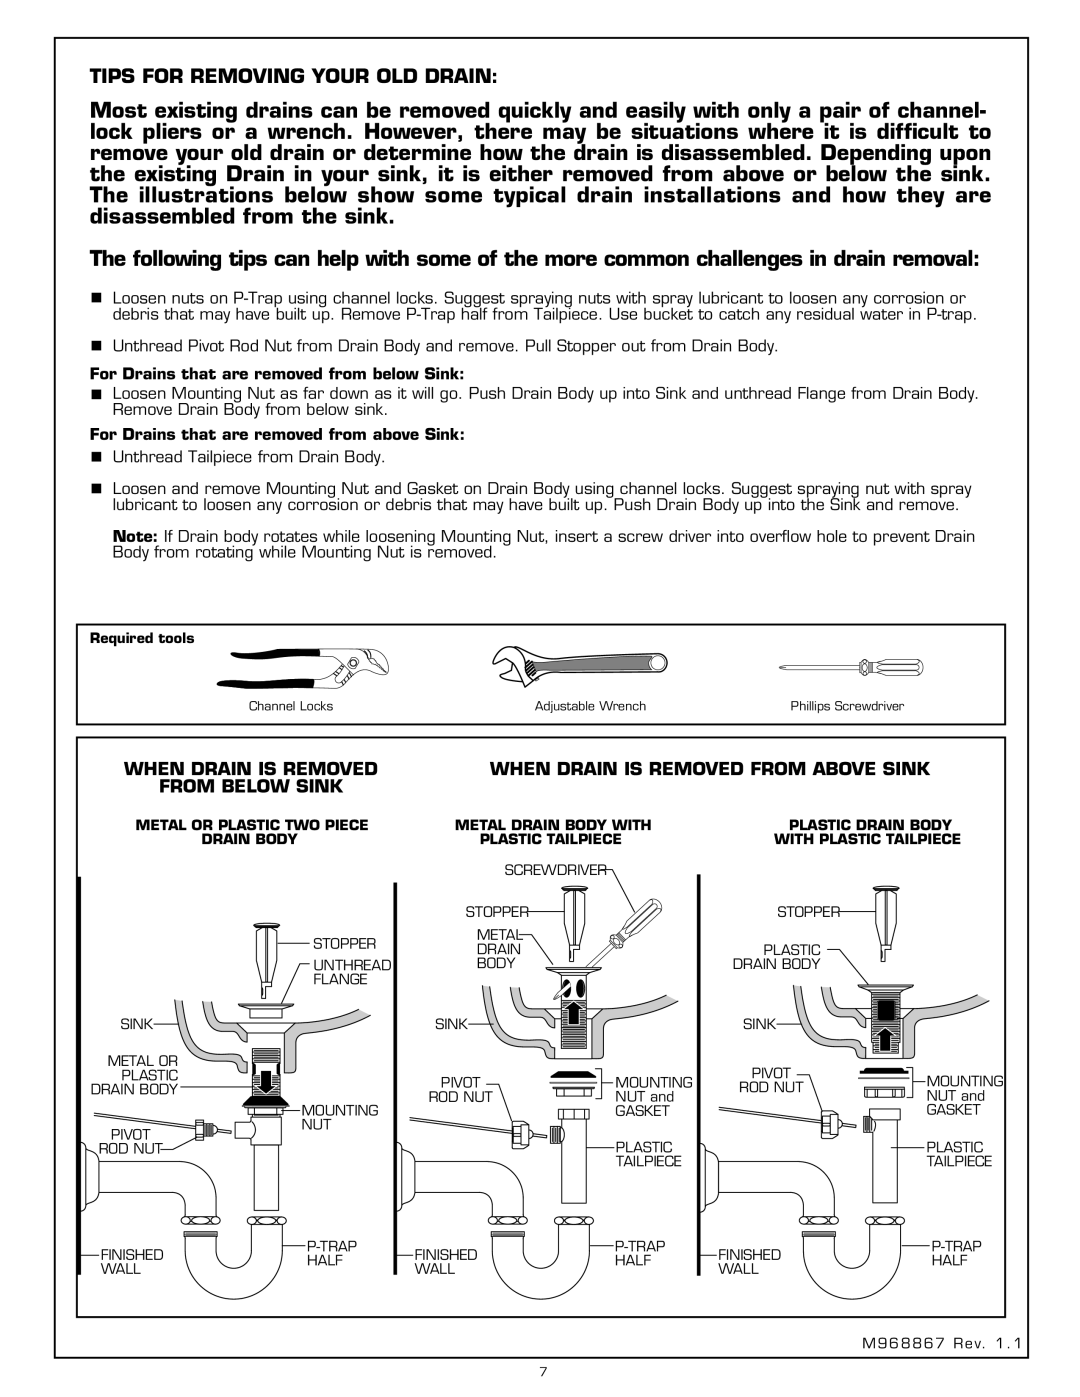 American Standard 7024 Tips For Removing Your Old Drain, When Drain Is Removed From Above Sink, From Below Sink 